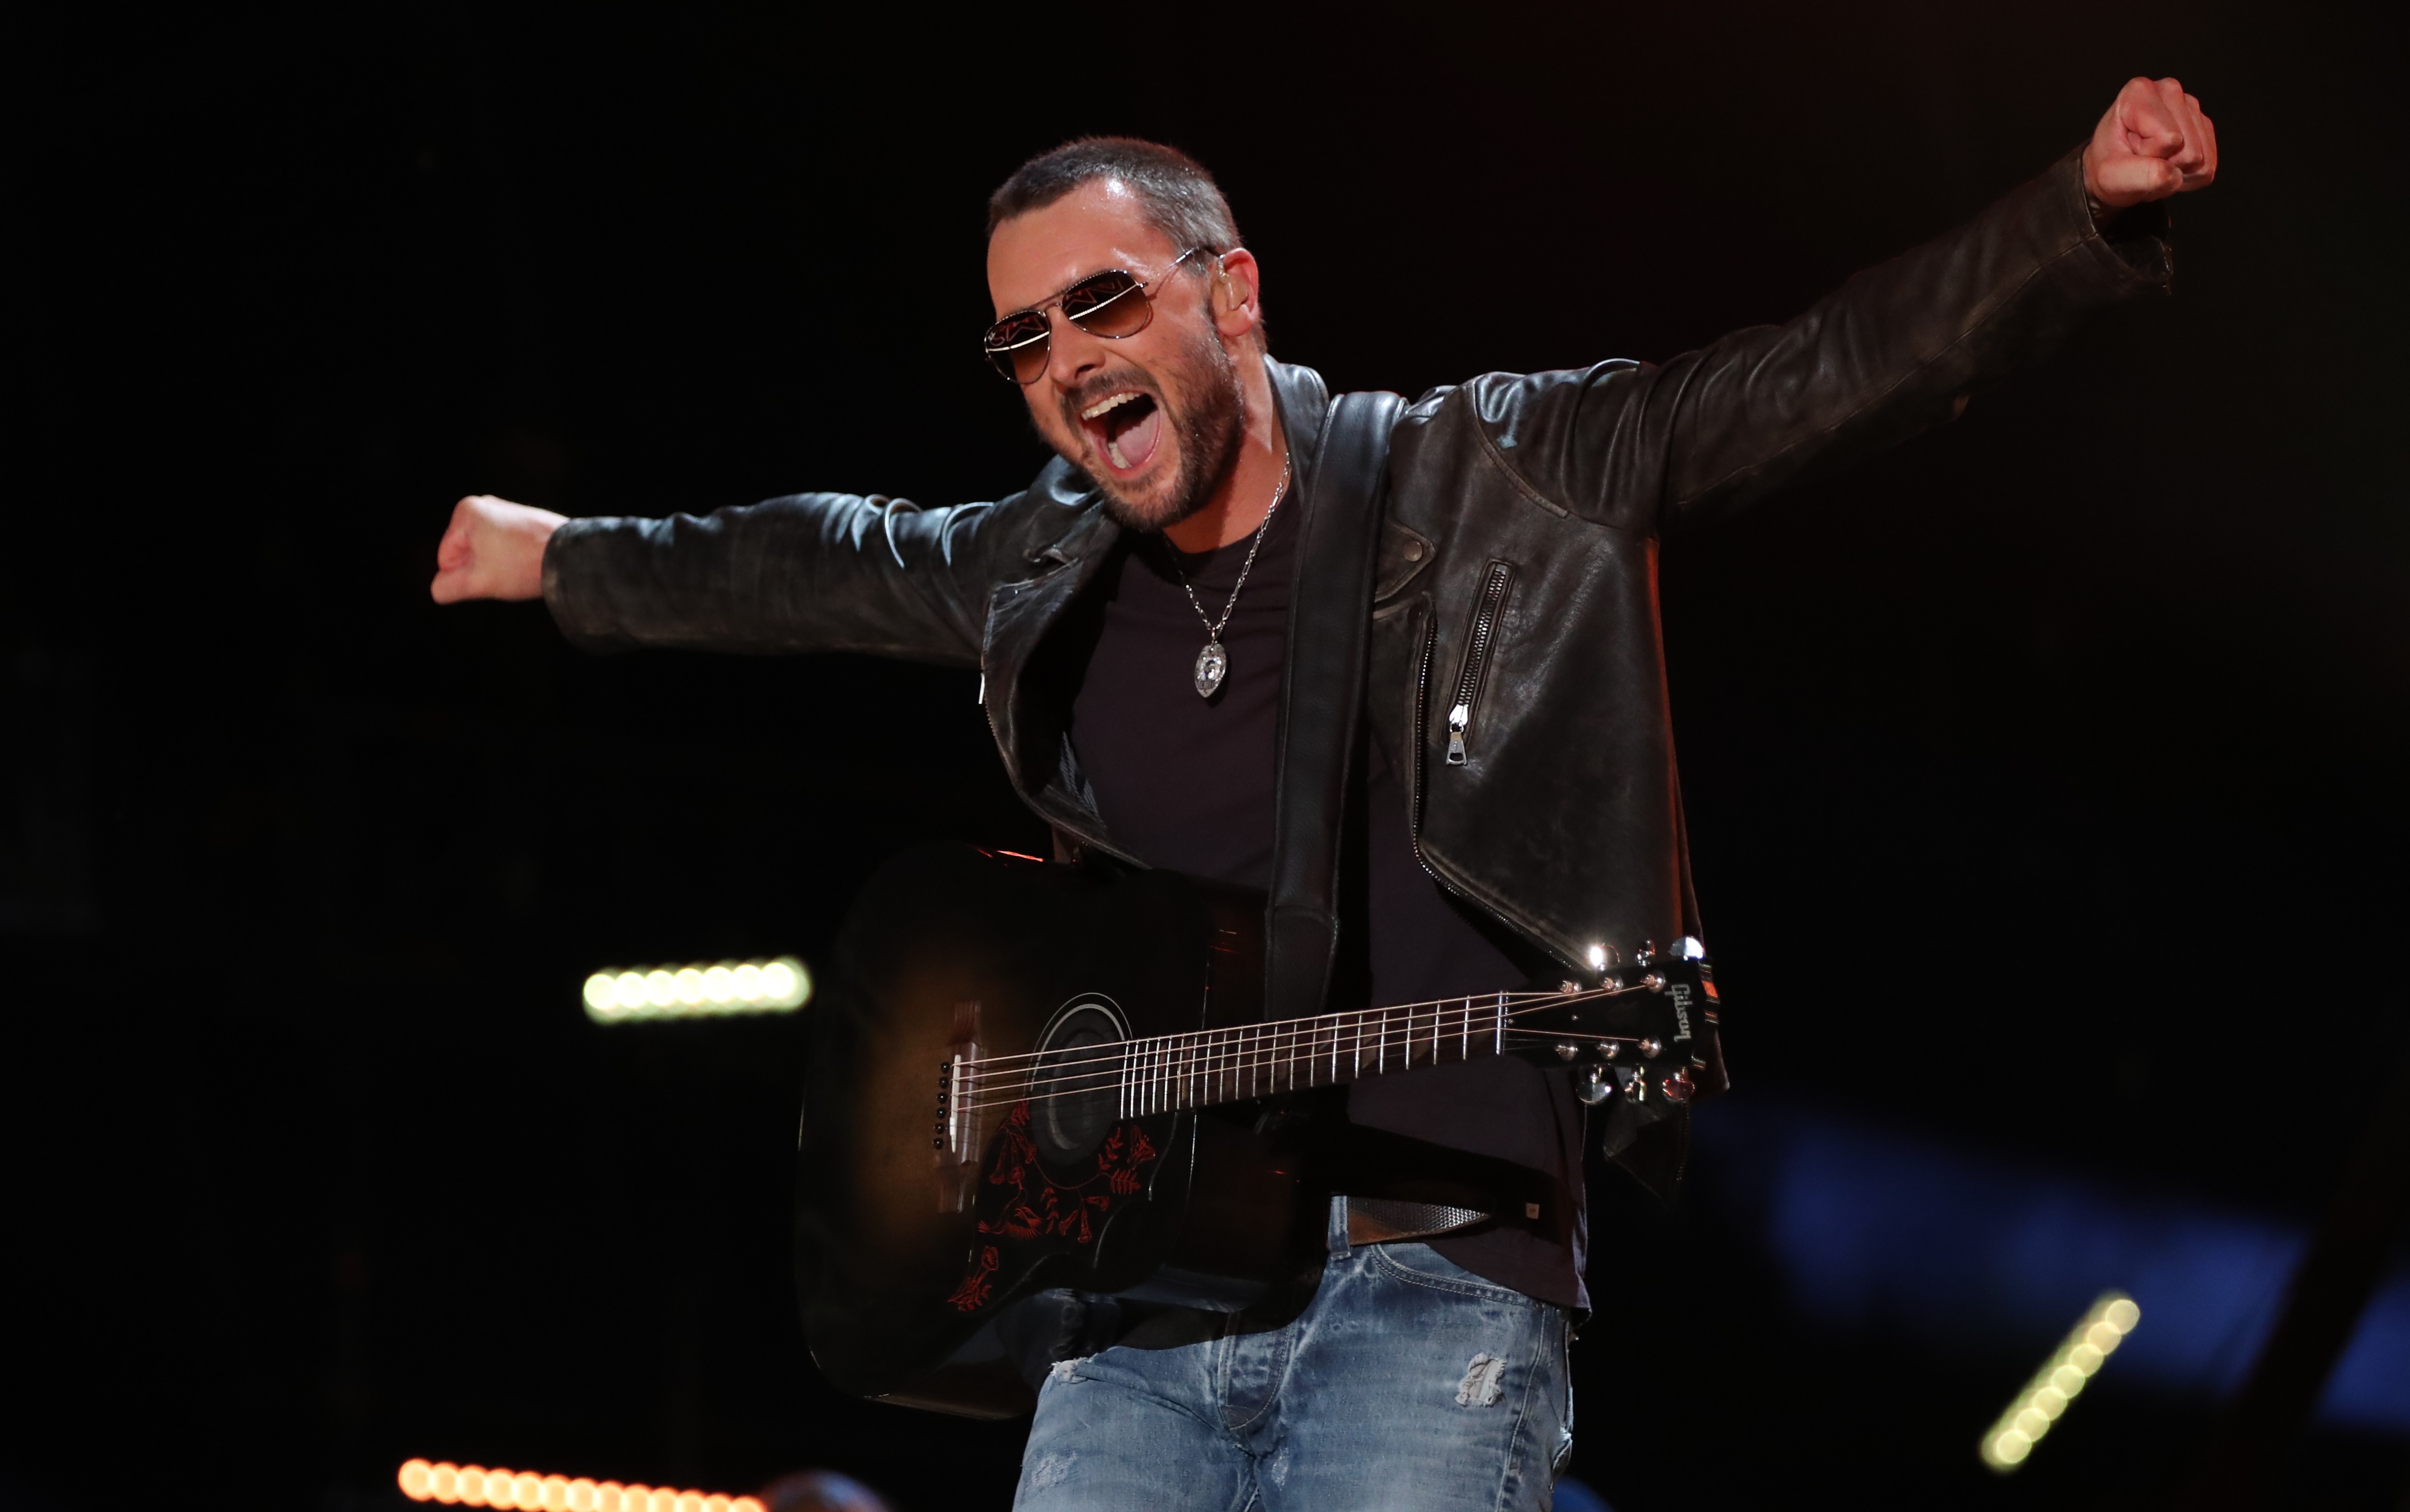 15 Reasons Why Eric Church is ‘THE CHIEF’